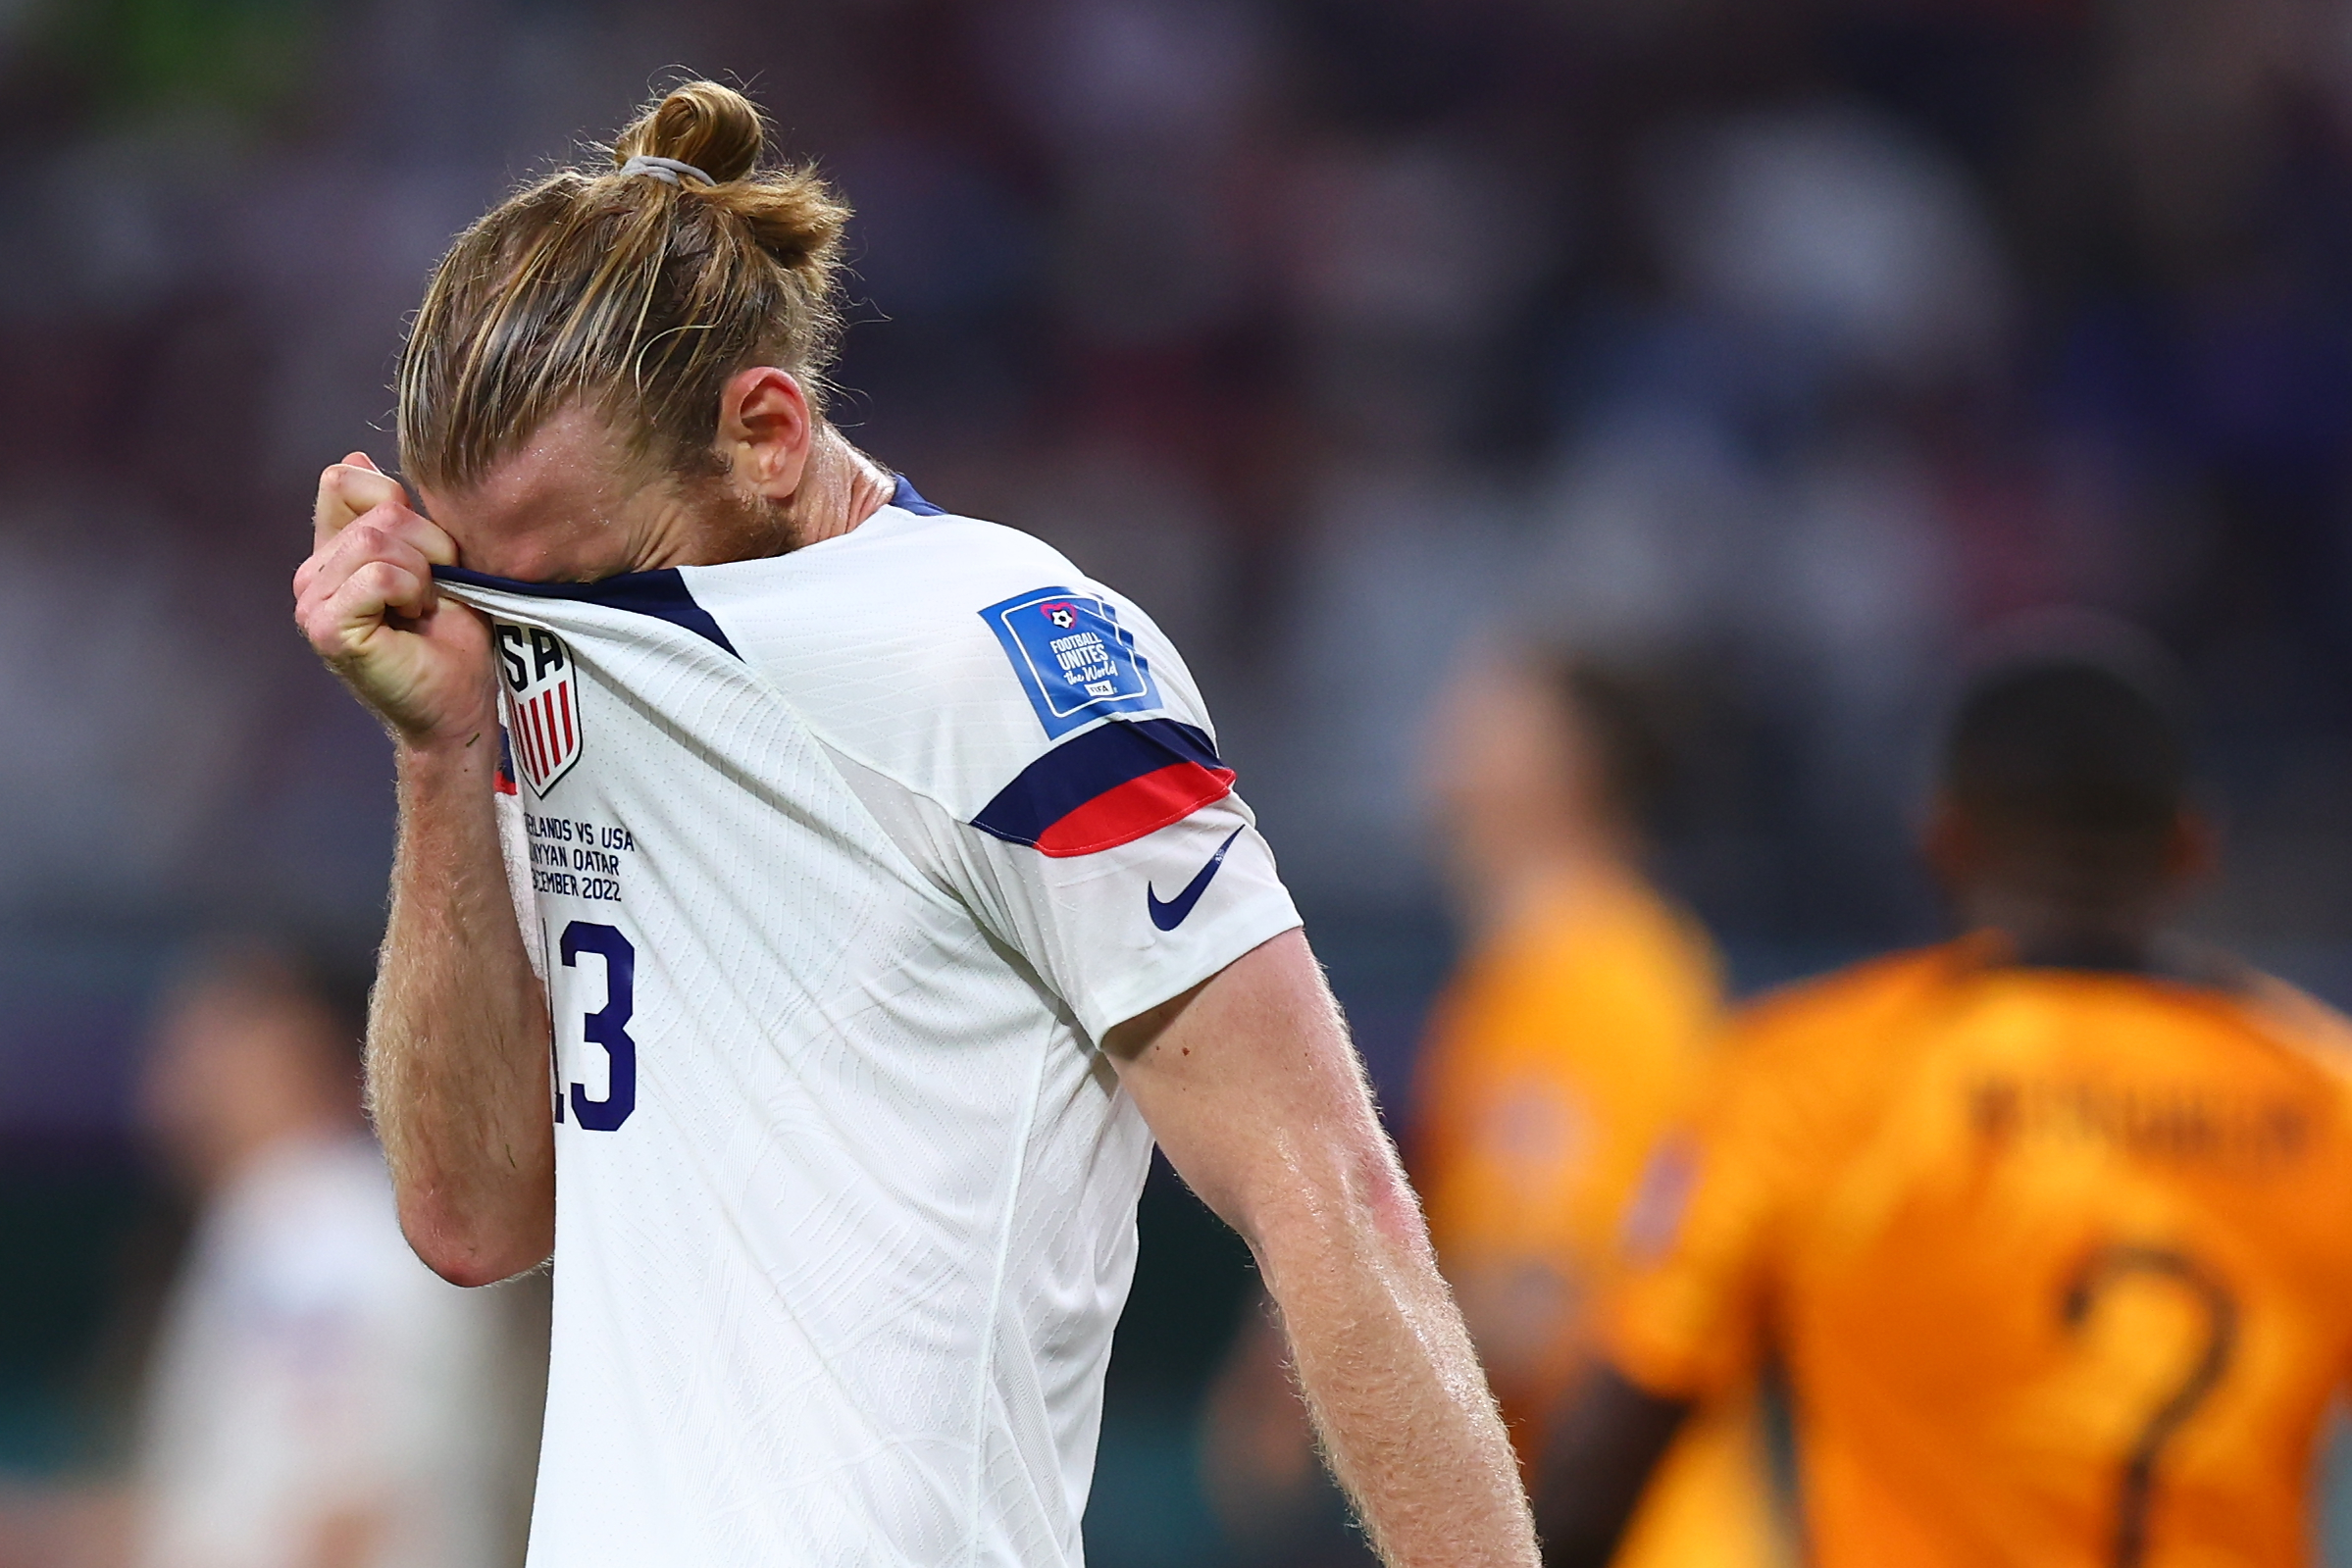 03 December 2022, Qatar, Al Rayyan: USA's Walker Zimmerman reacts in frustration to defeat after his side's elimination, following the final whistle of the FIFA World Cup Qatar 2022 round of 16 soccer match between the Netherlands and USA at the Khalifa International Stadium. Photo: Tom Weller/dpa